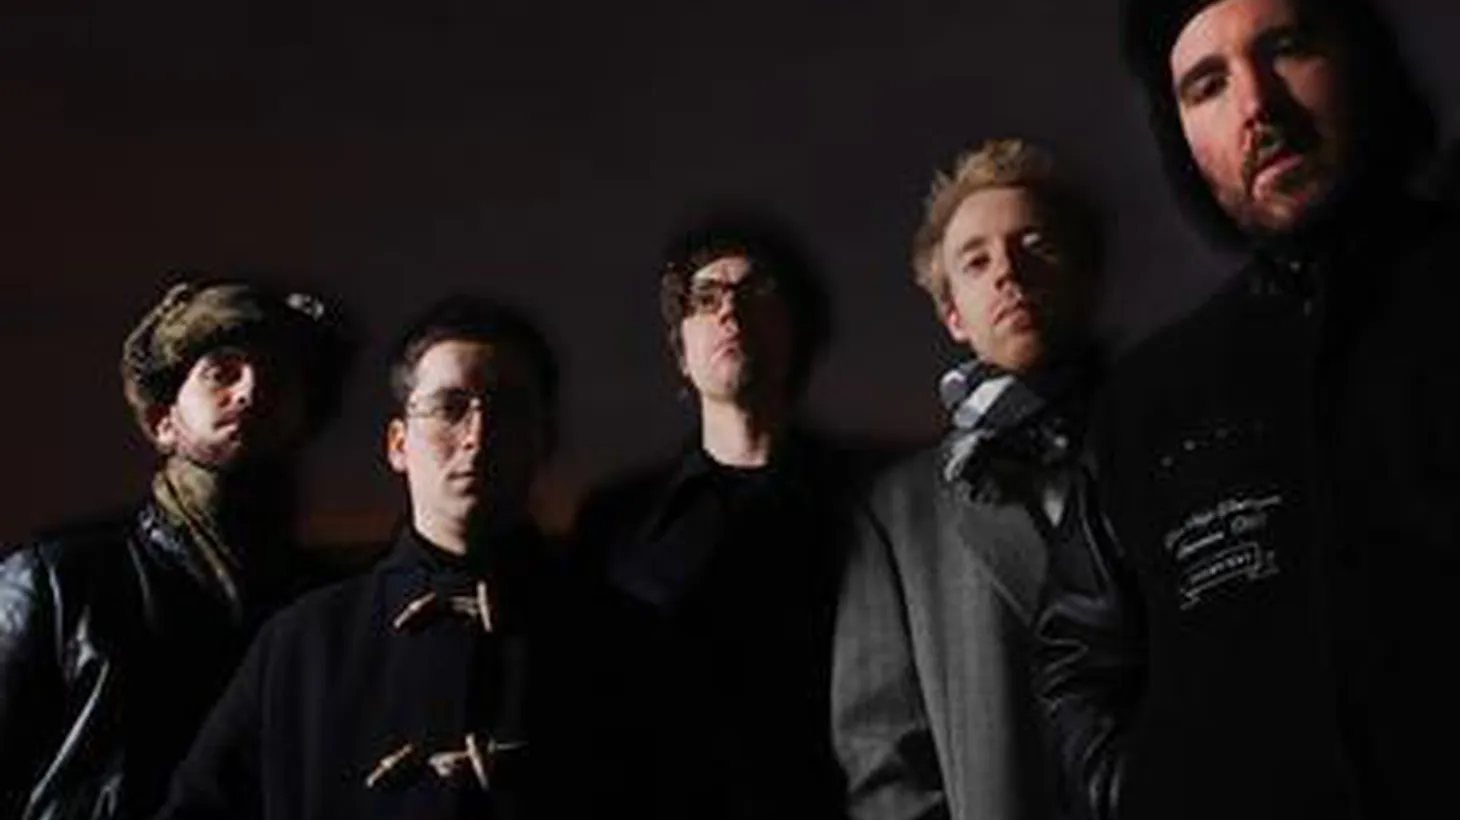 UK band Hot Chip bring the party whenever they play live...